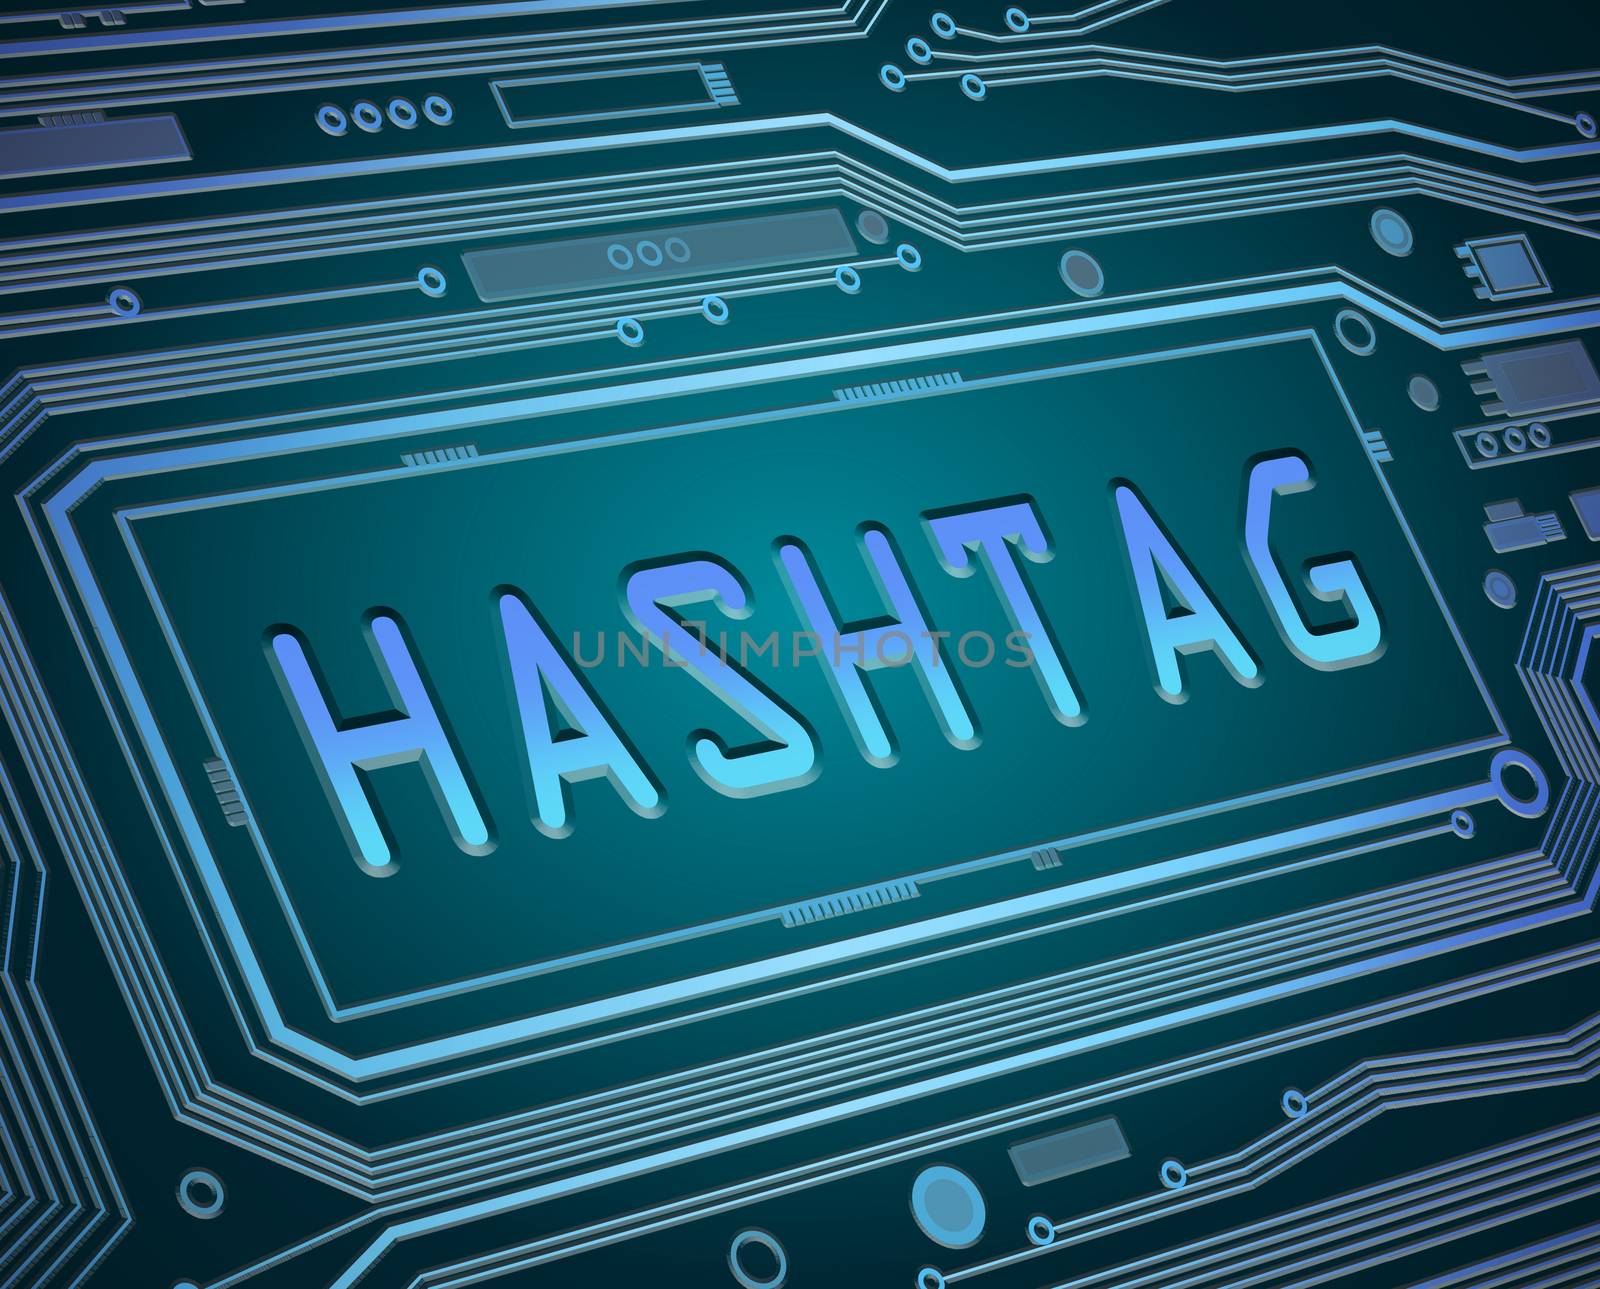 Abstract style illustration depicting printed circuit board components with a hashtag concept.